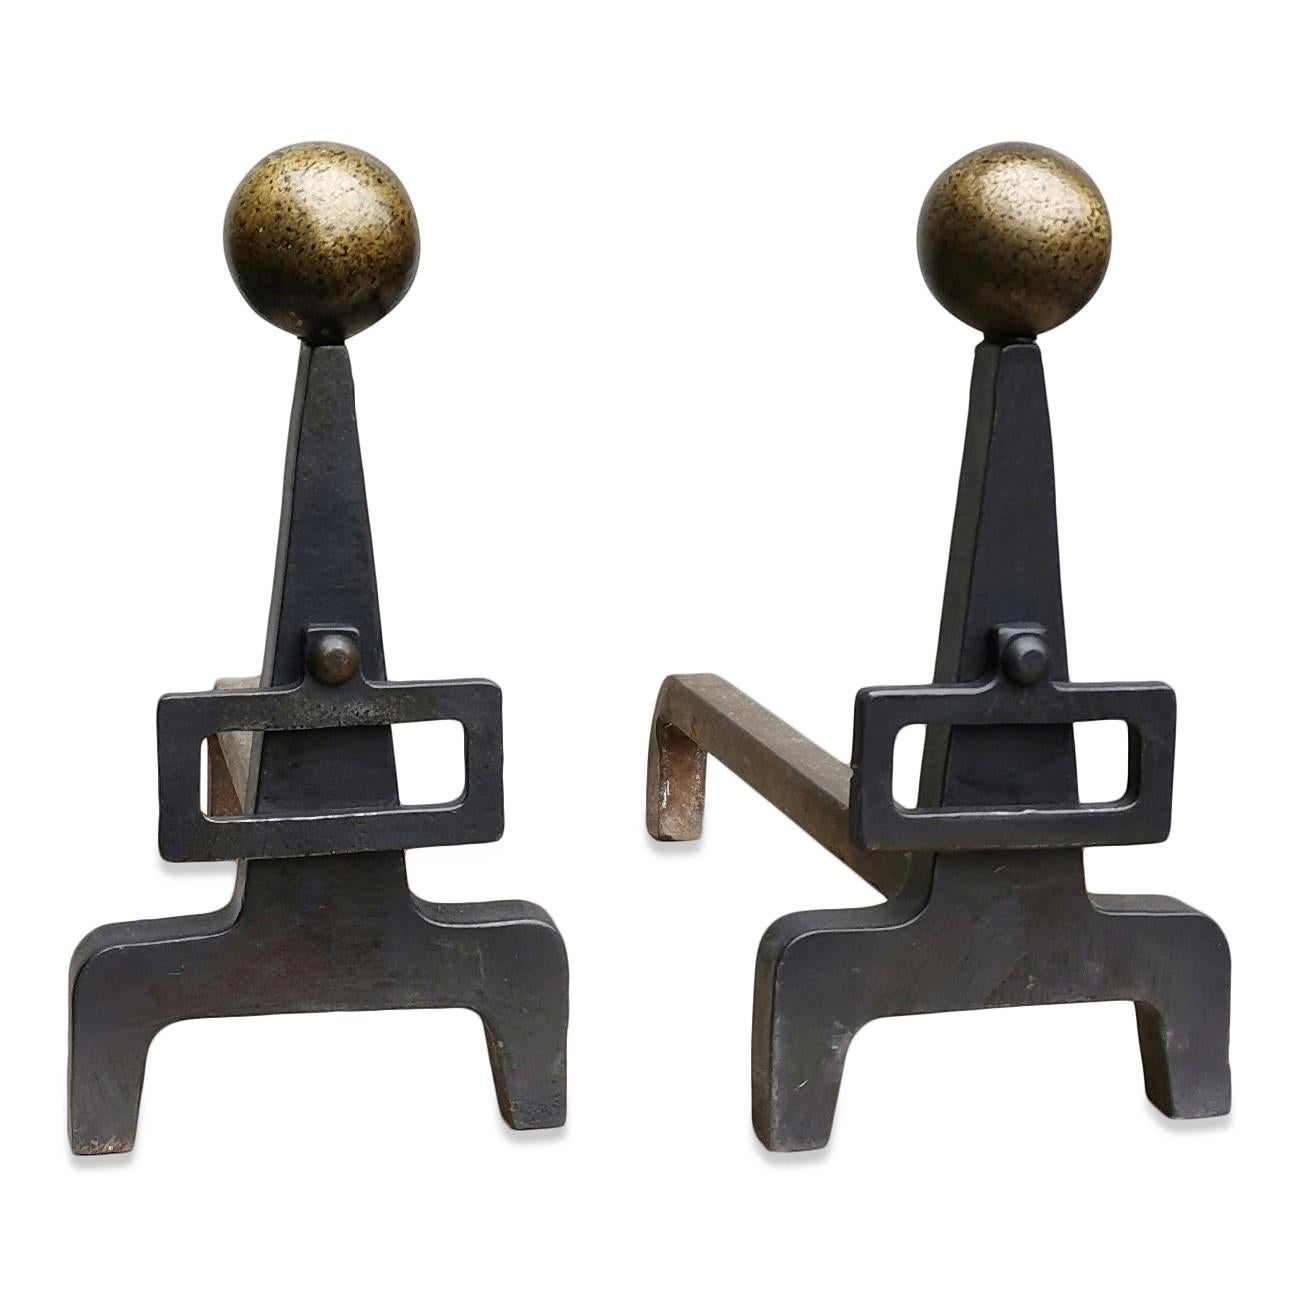 Modernist wrought iron andirons with buckle
Hammered brass balls on top of each andiron.
 